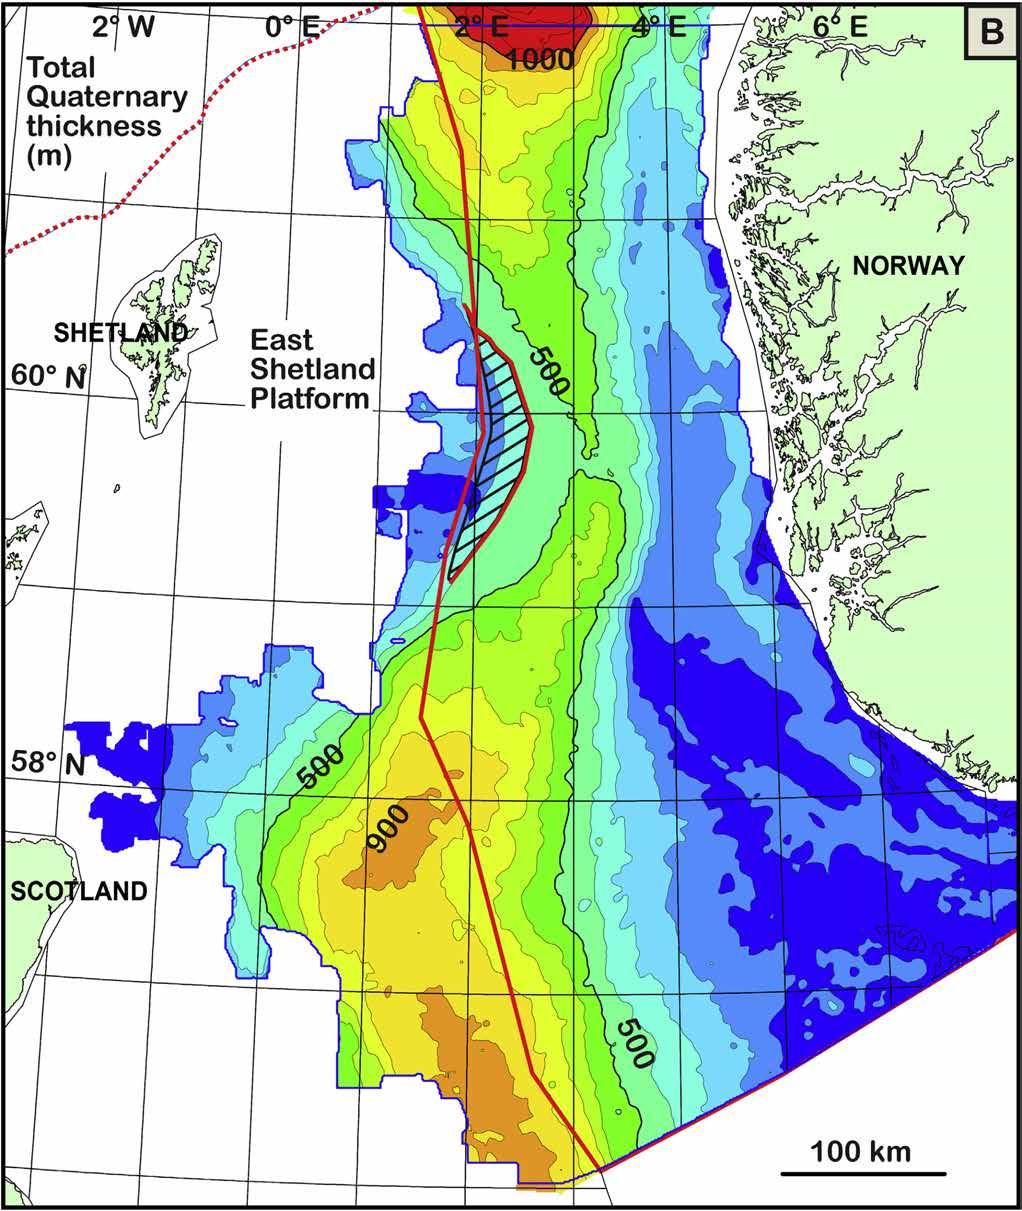 128 D. Ottesen et al. / Marine and Petroleum Geology 56 (2014) 123e146 Figure 4. (continued). Many studies of the glacial geology of the North Sea area have been carried out (e.g. Stoker et al.